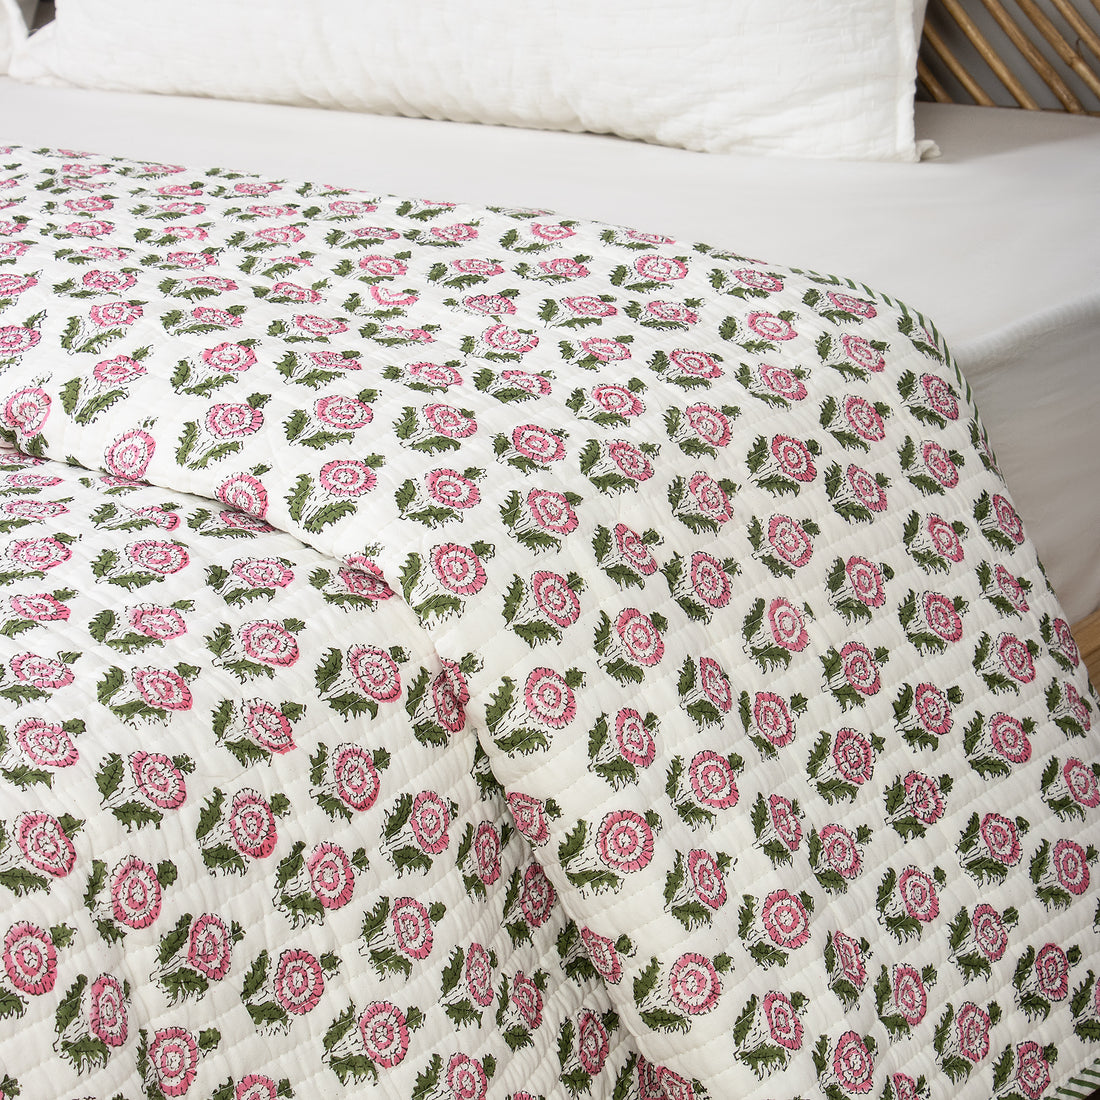 Multicolor Floral Printed Cotton Machine Bed Quilts Online